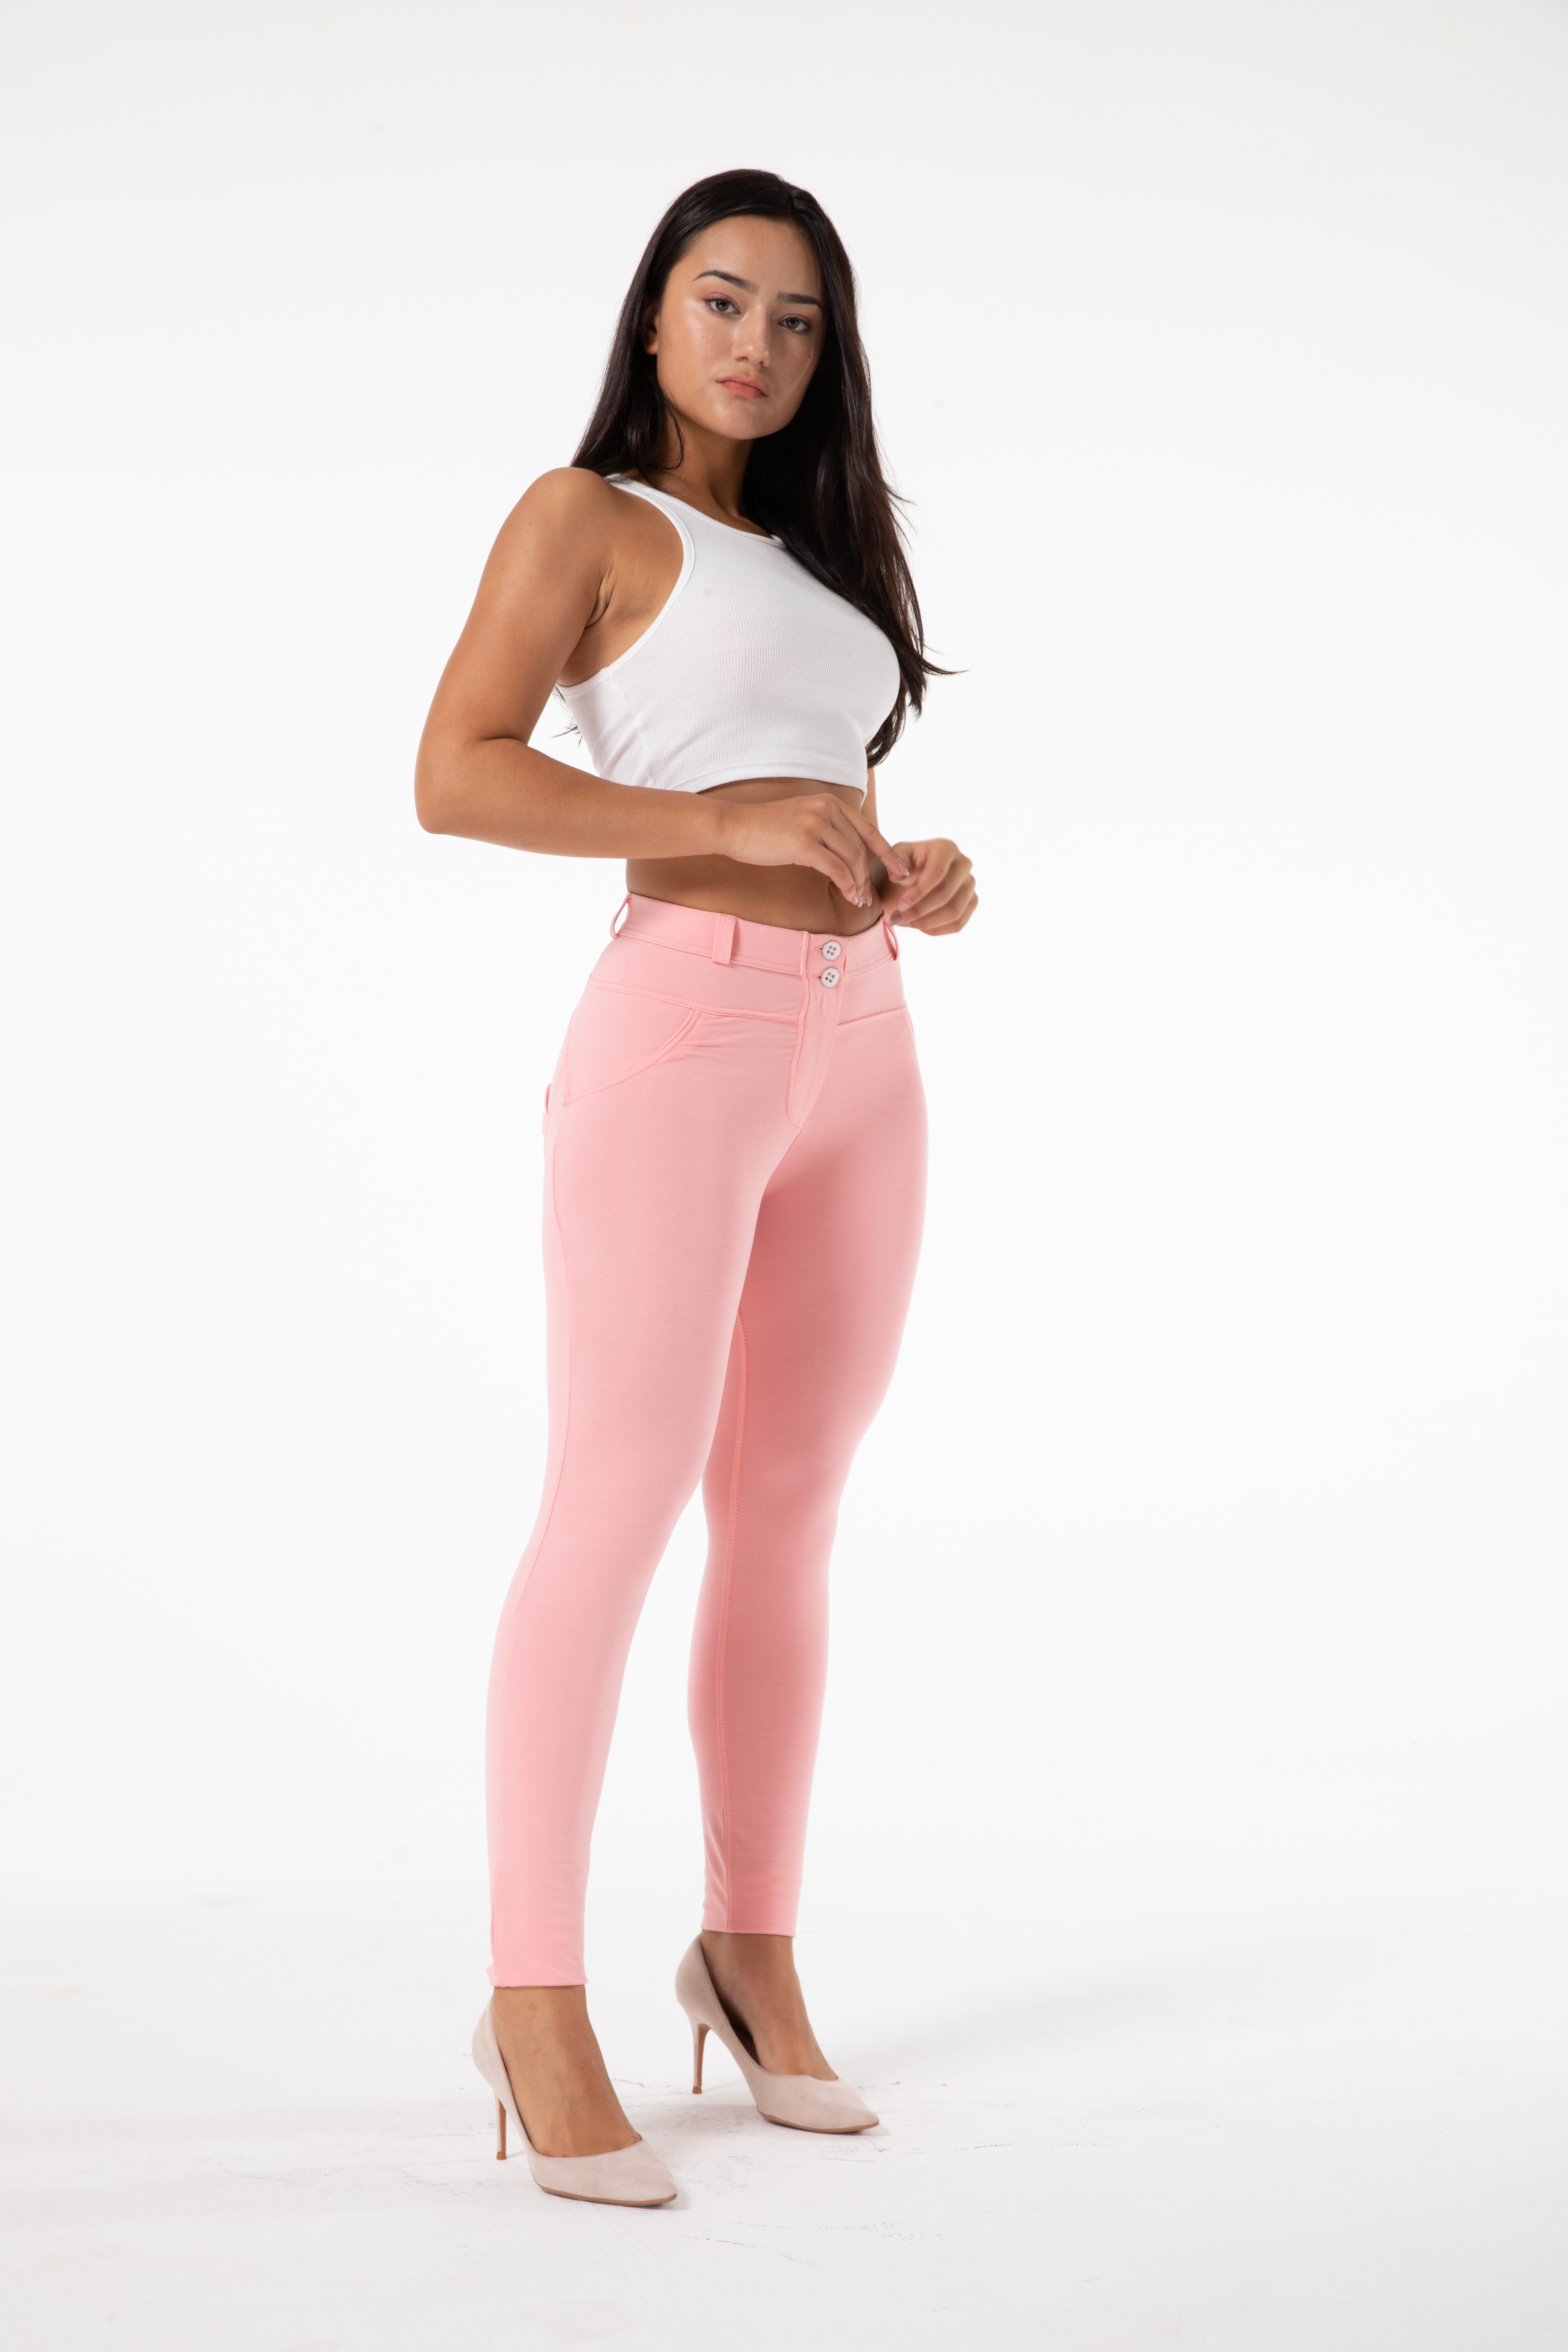 Shascullfites gym and shaping White Fleece Lined Leggings Winter